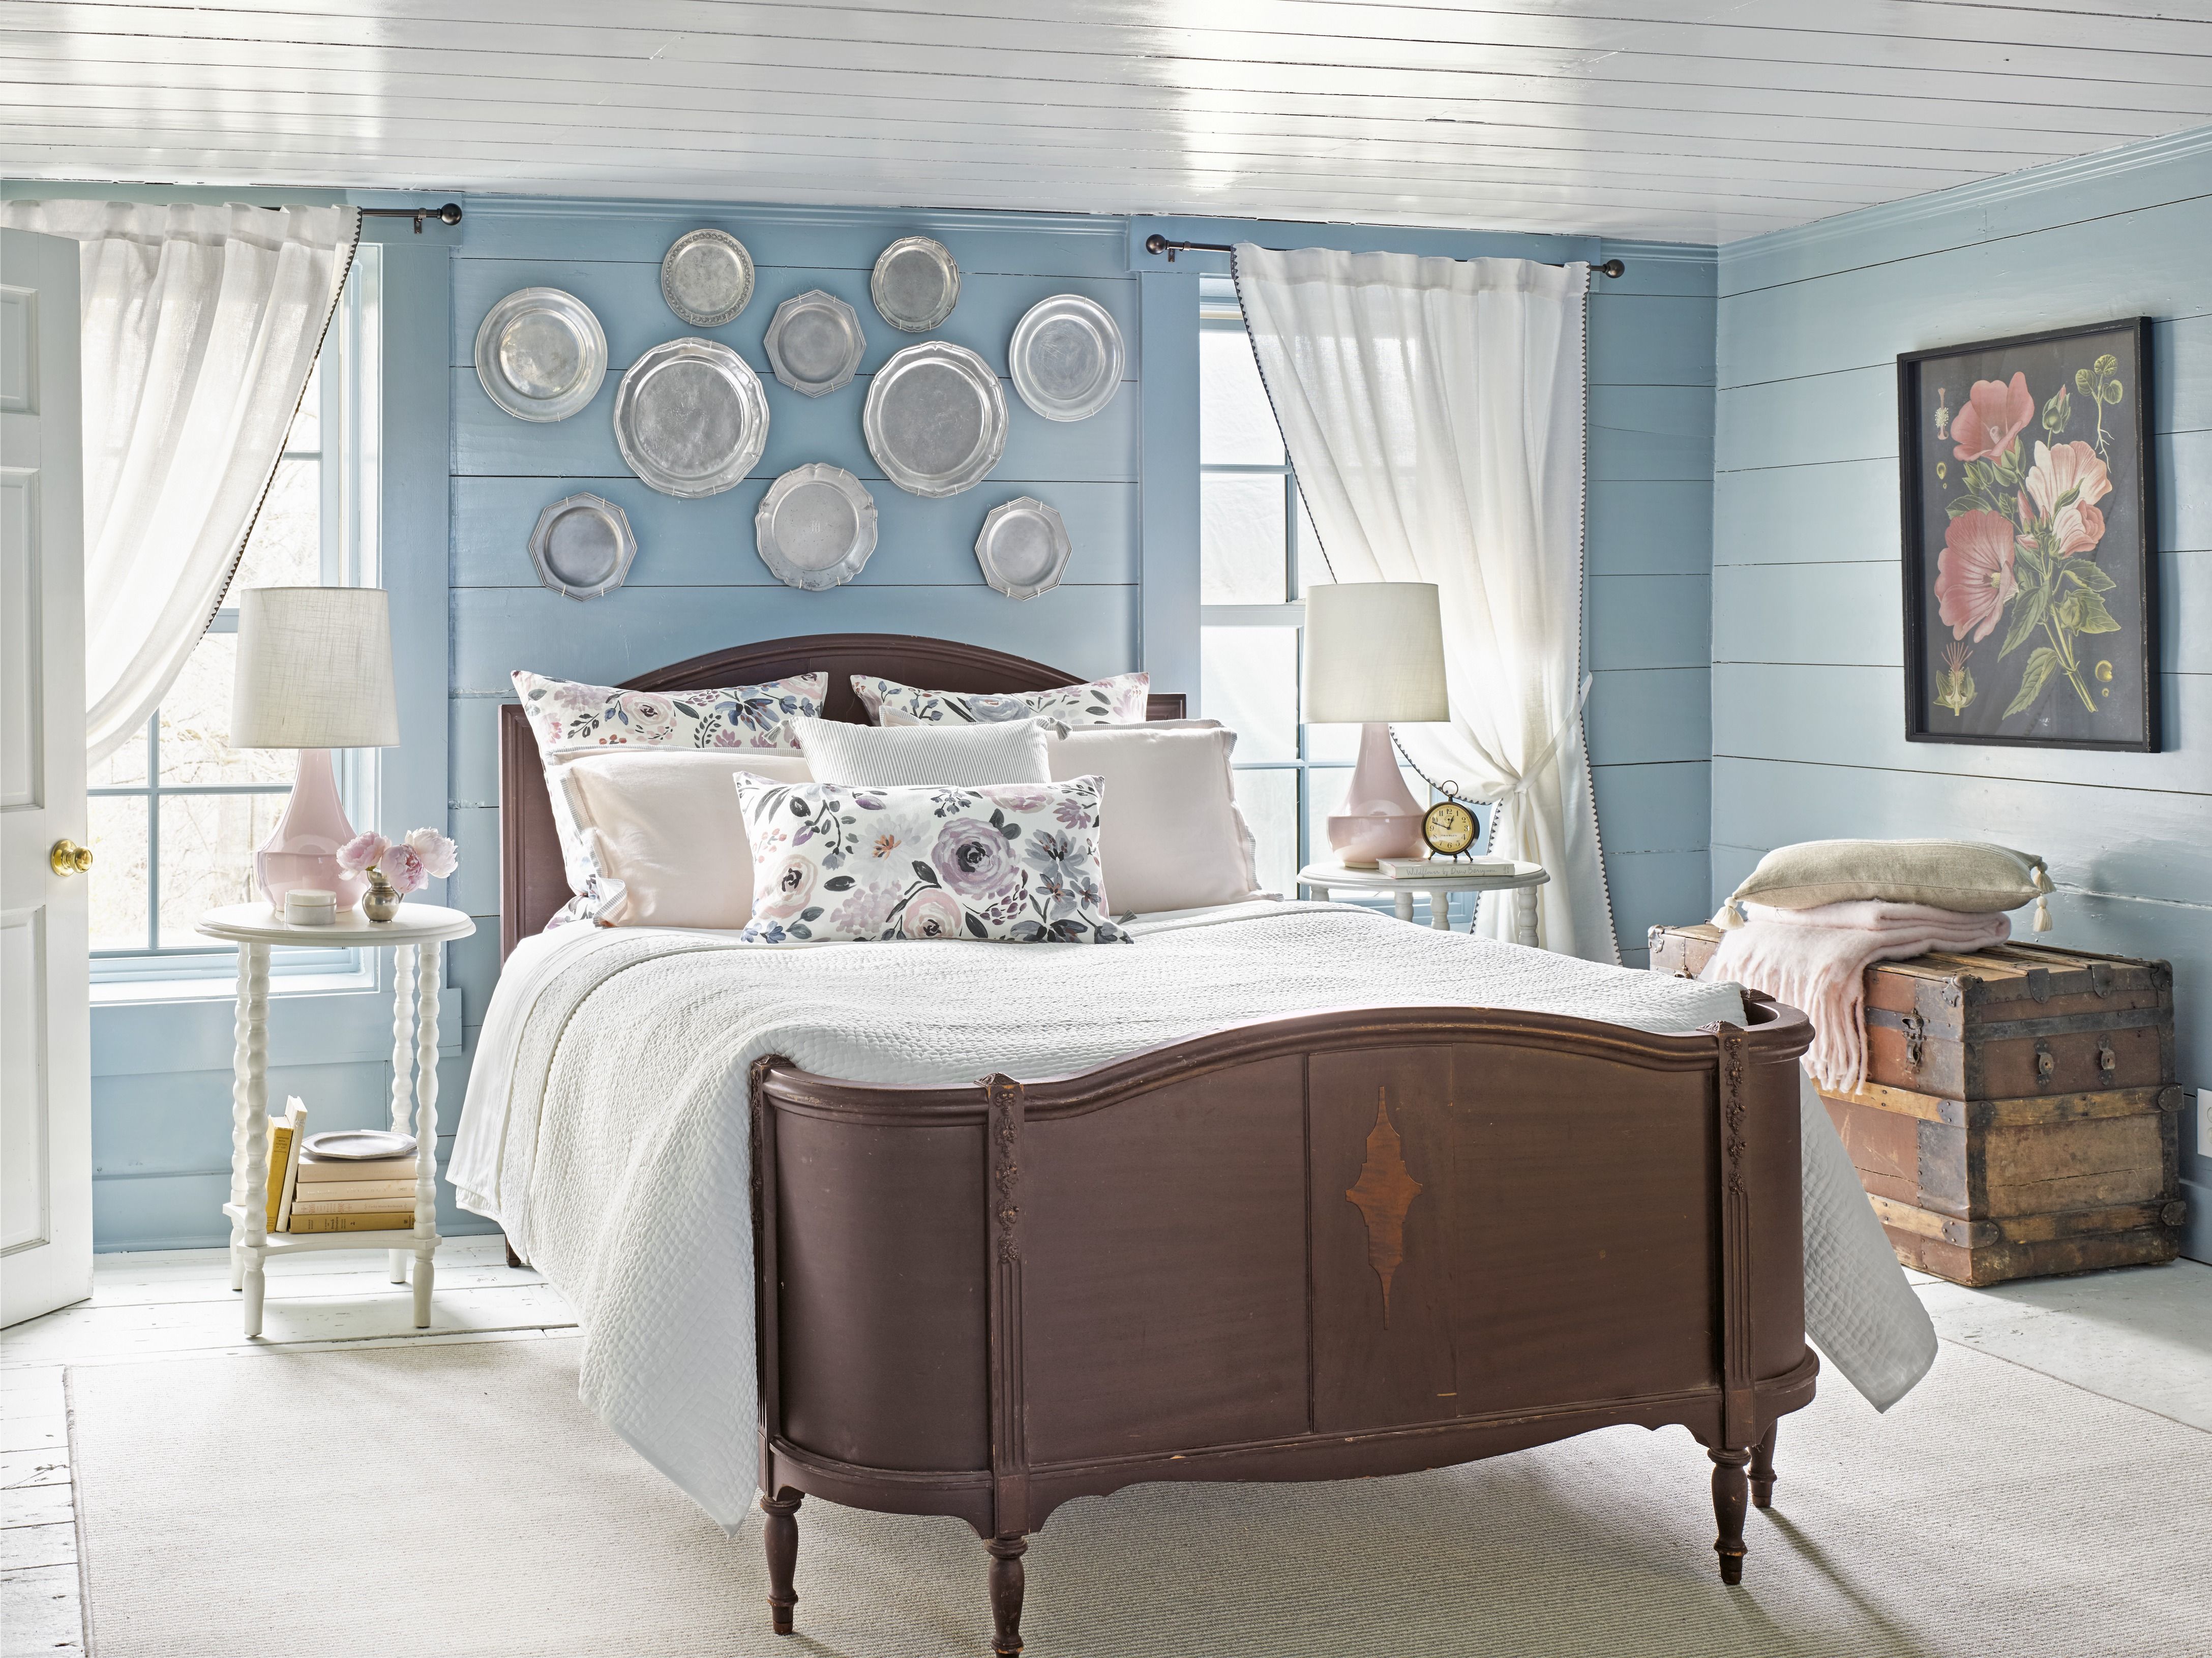 The best paint colors for a calm and serene bedroom